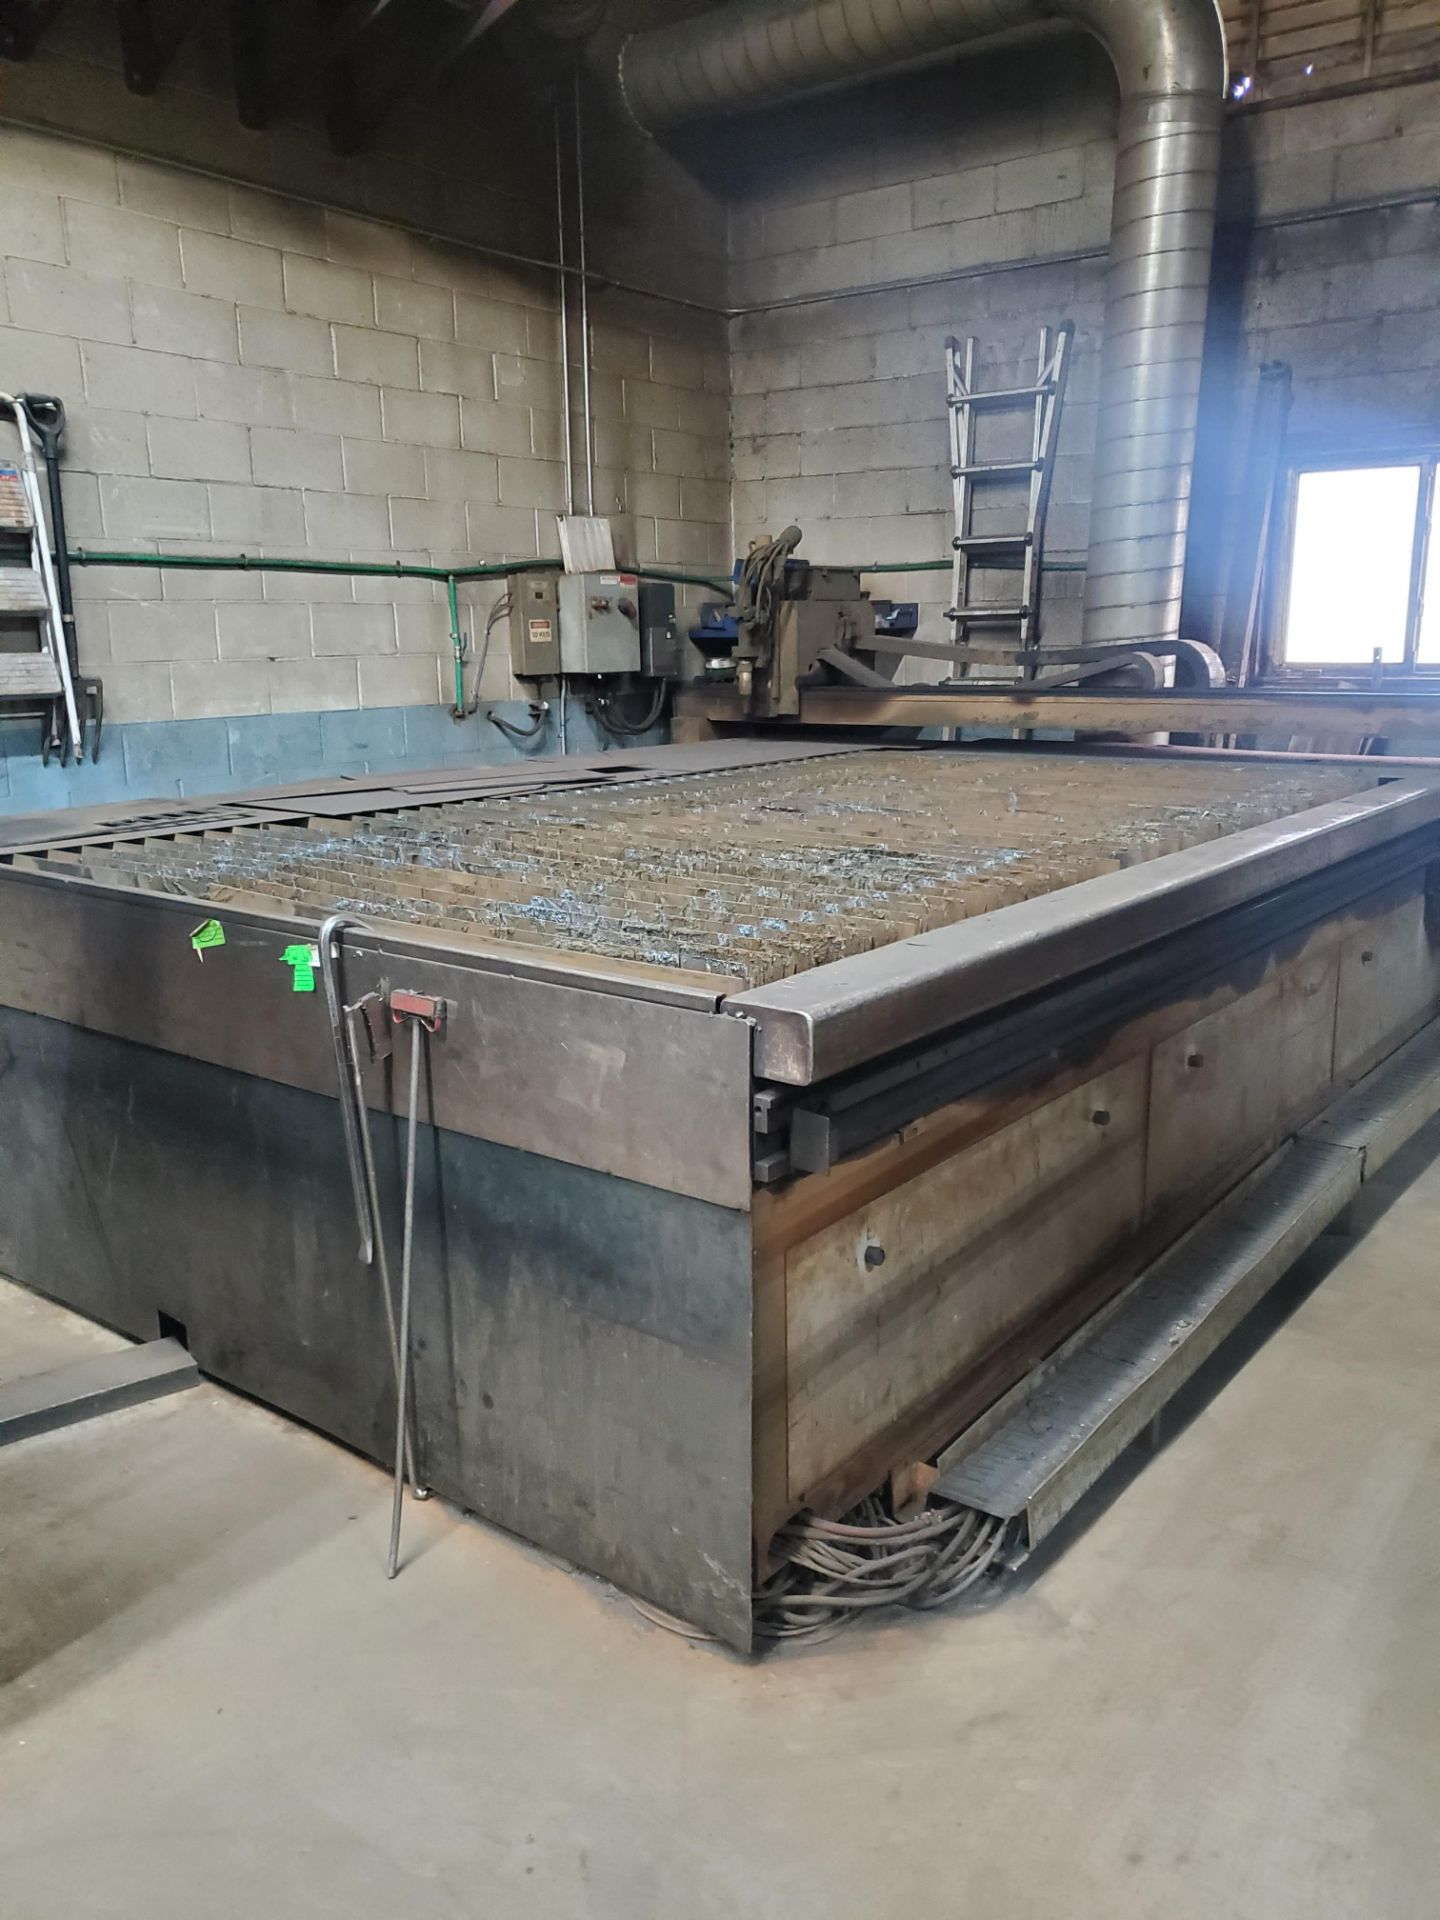 2006 Proline Precision Plasma Cutting System Table 96" x 120" model 2260 total dimensions 32. - Image 2 of 5